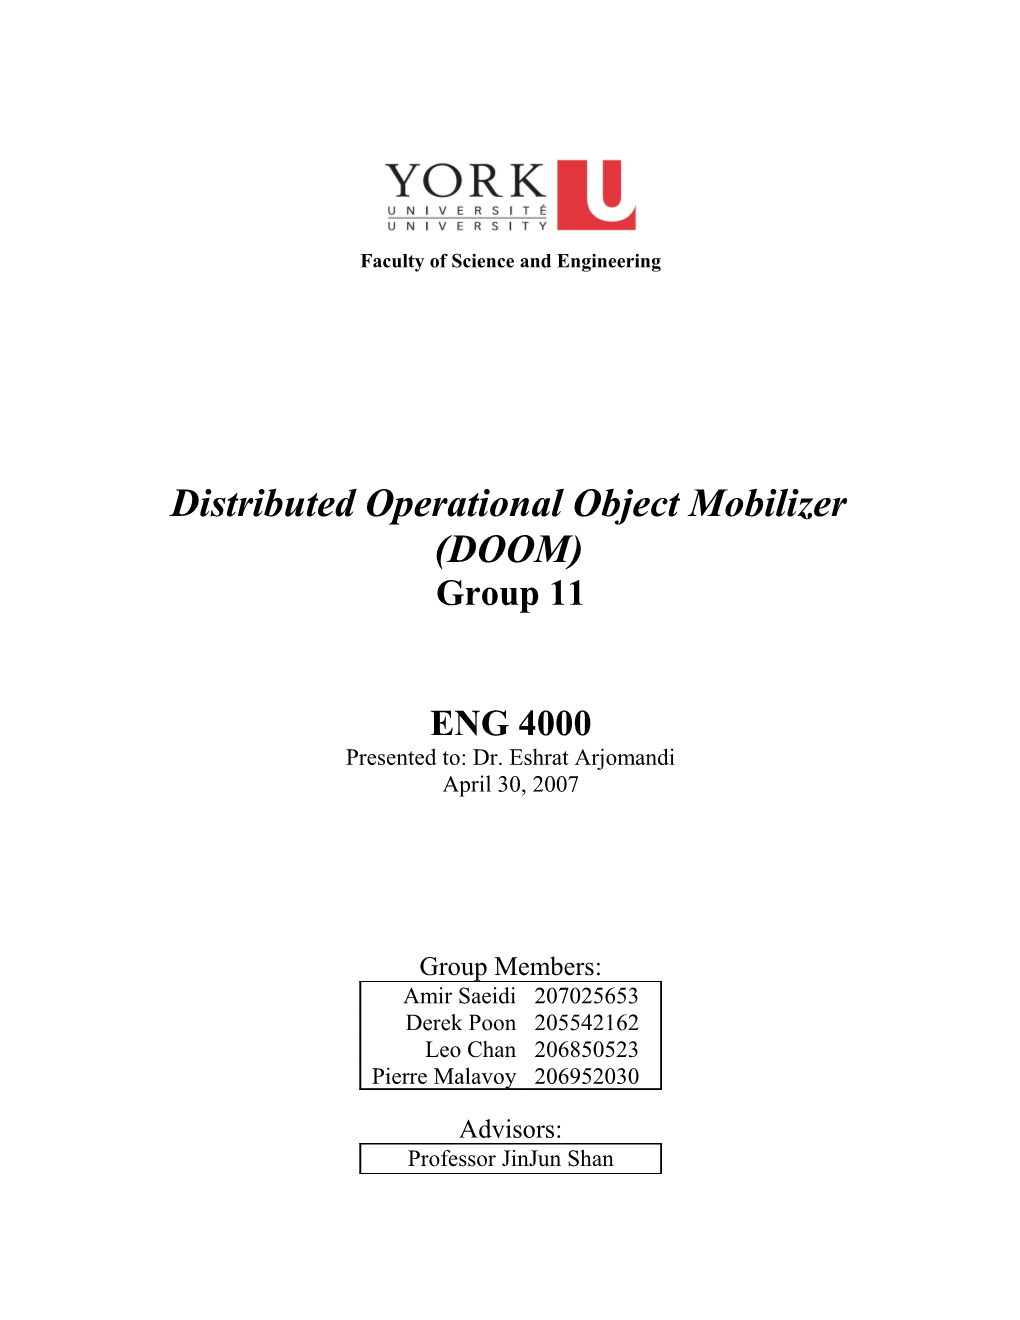 Distributed Operational Object Mobilize (DOOM)